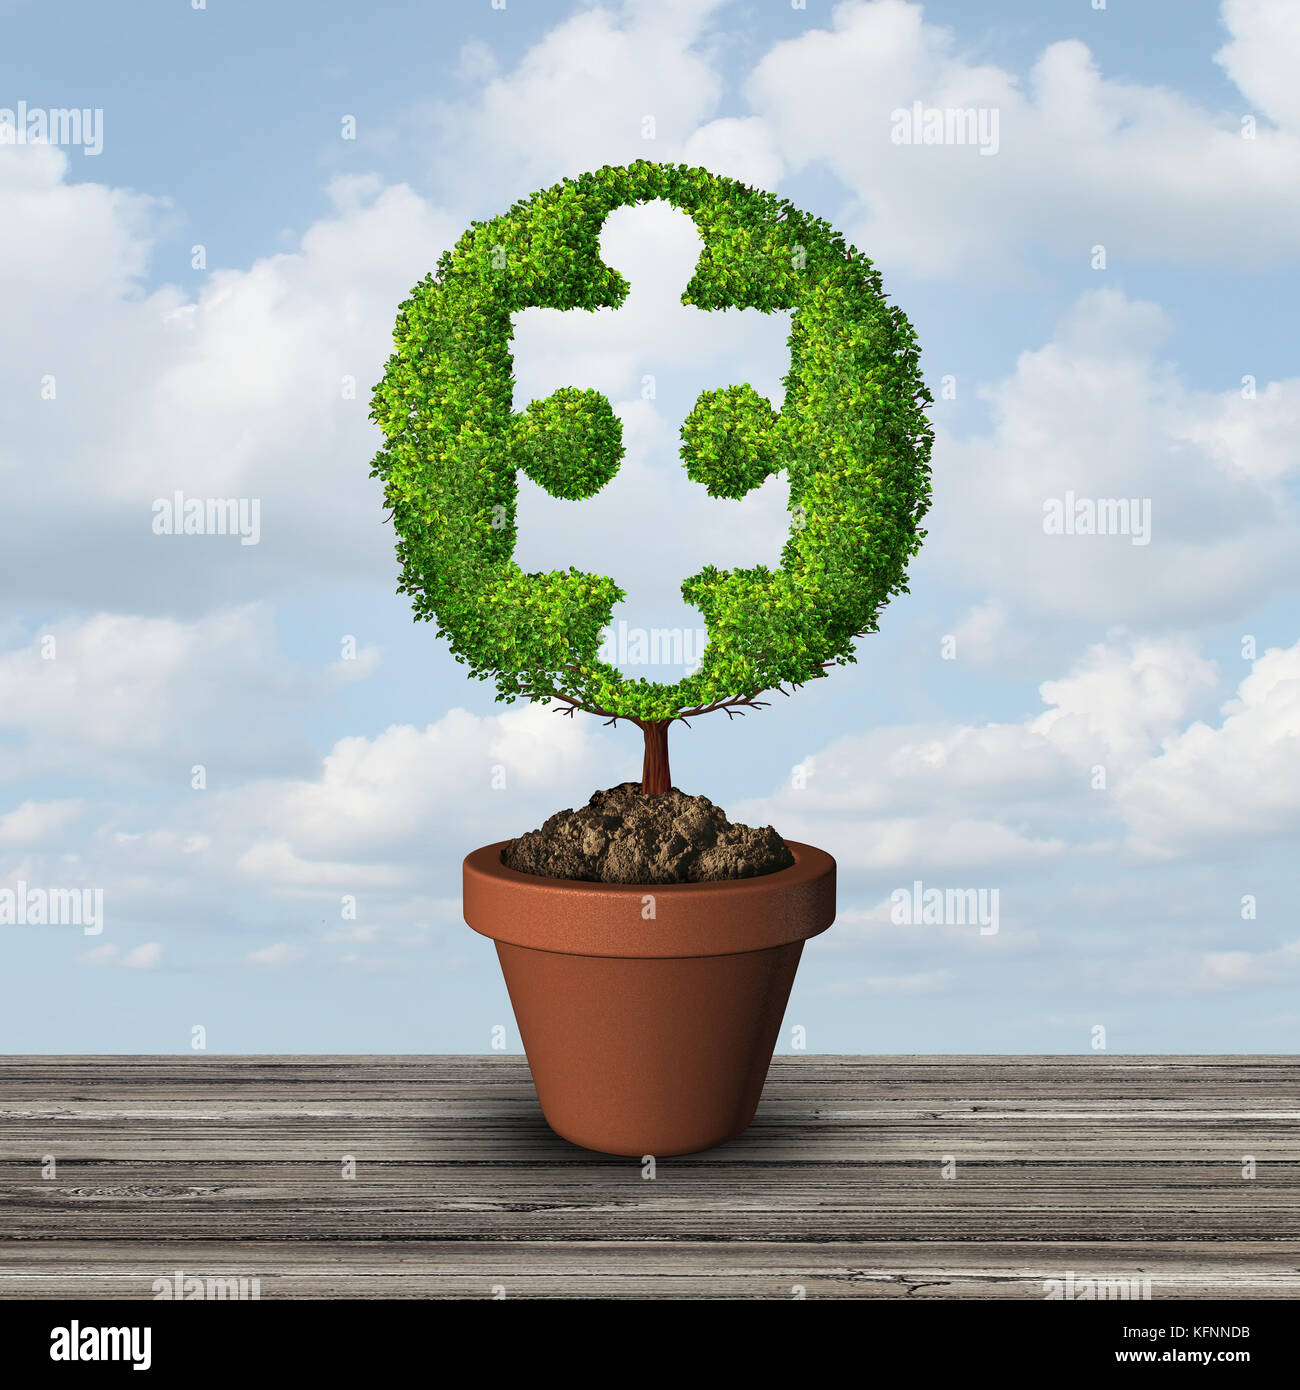 Growth consulting solution idea as a growing tree shaped as a jigsaw puzzle piece with 3D illustration elements. Stock Photo